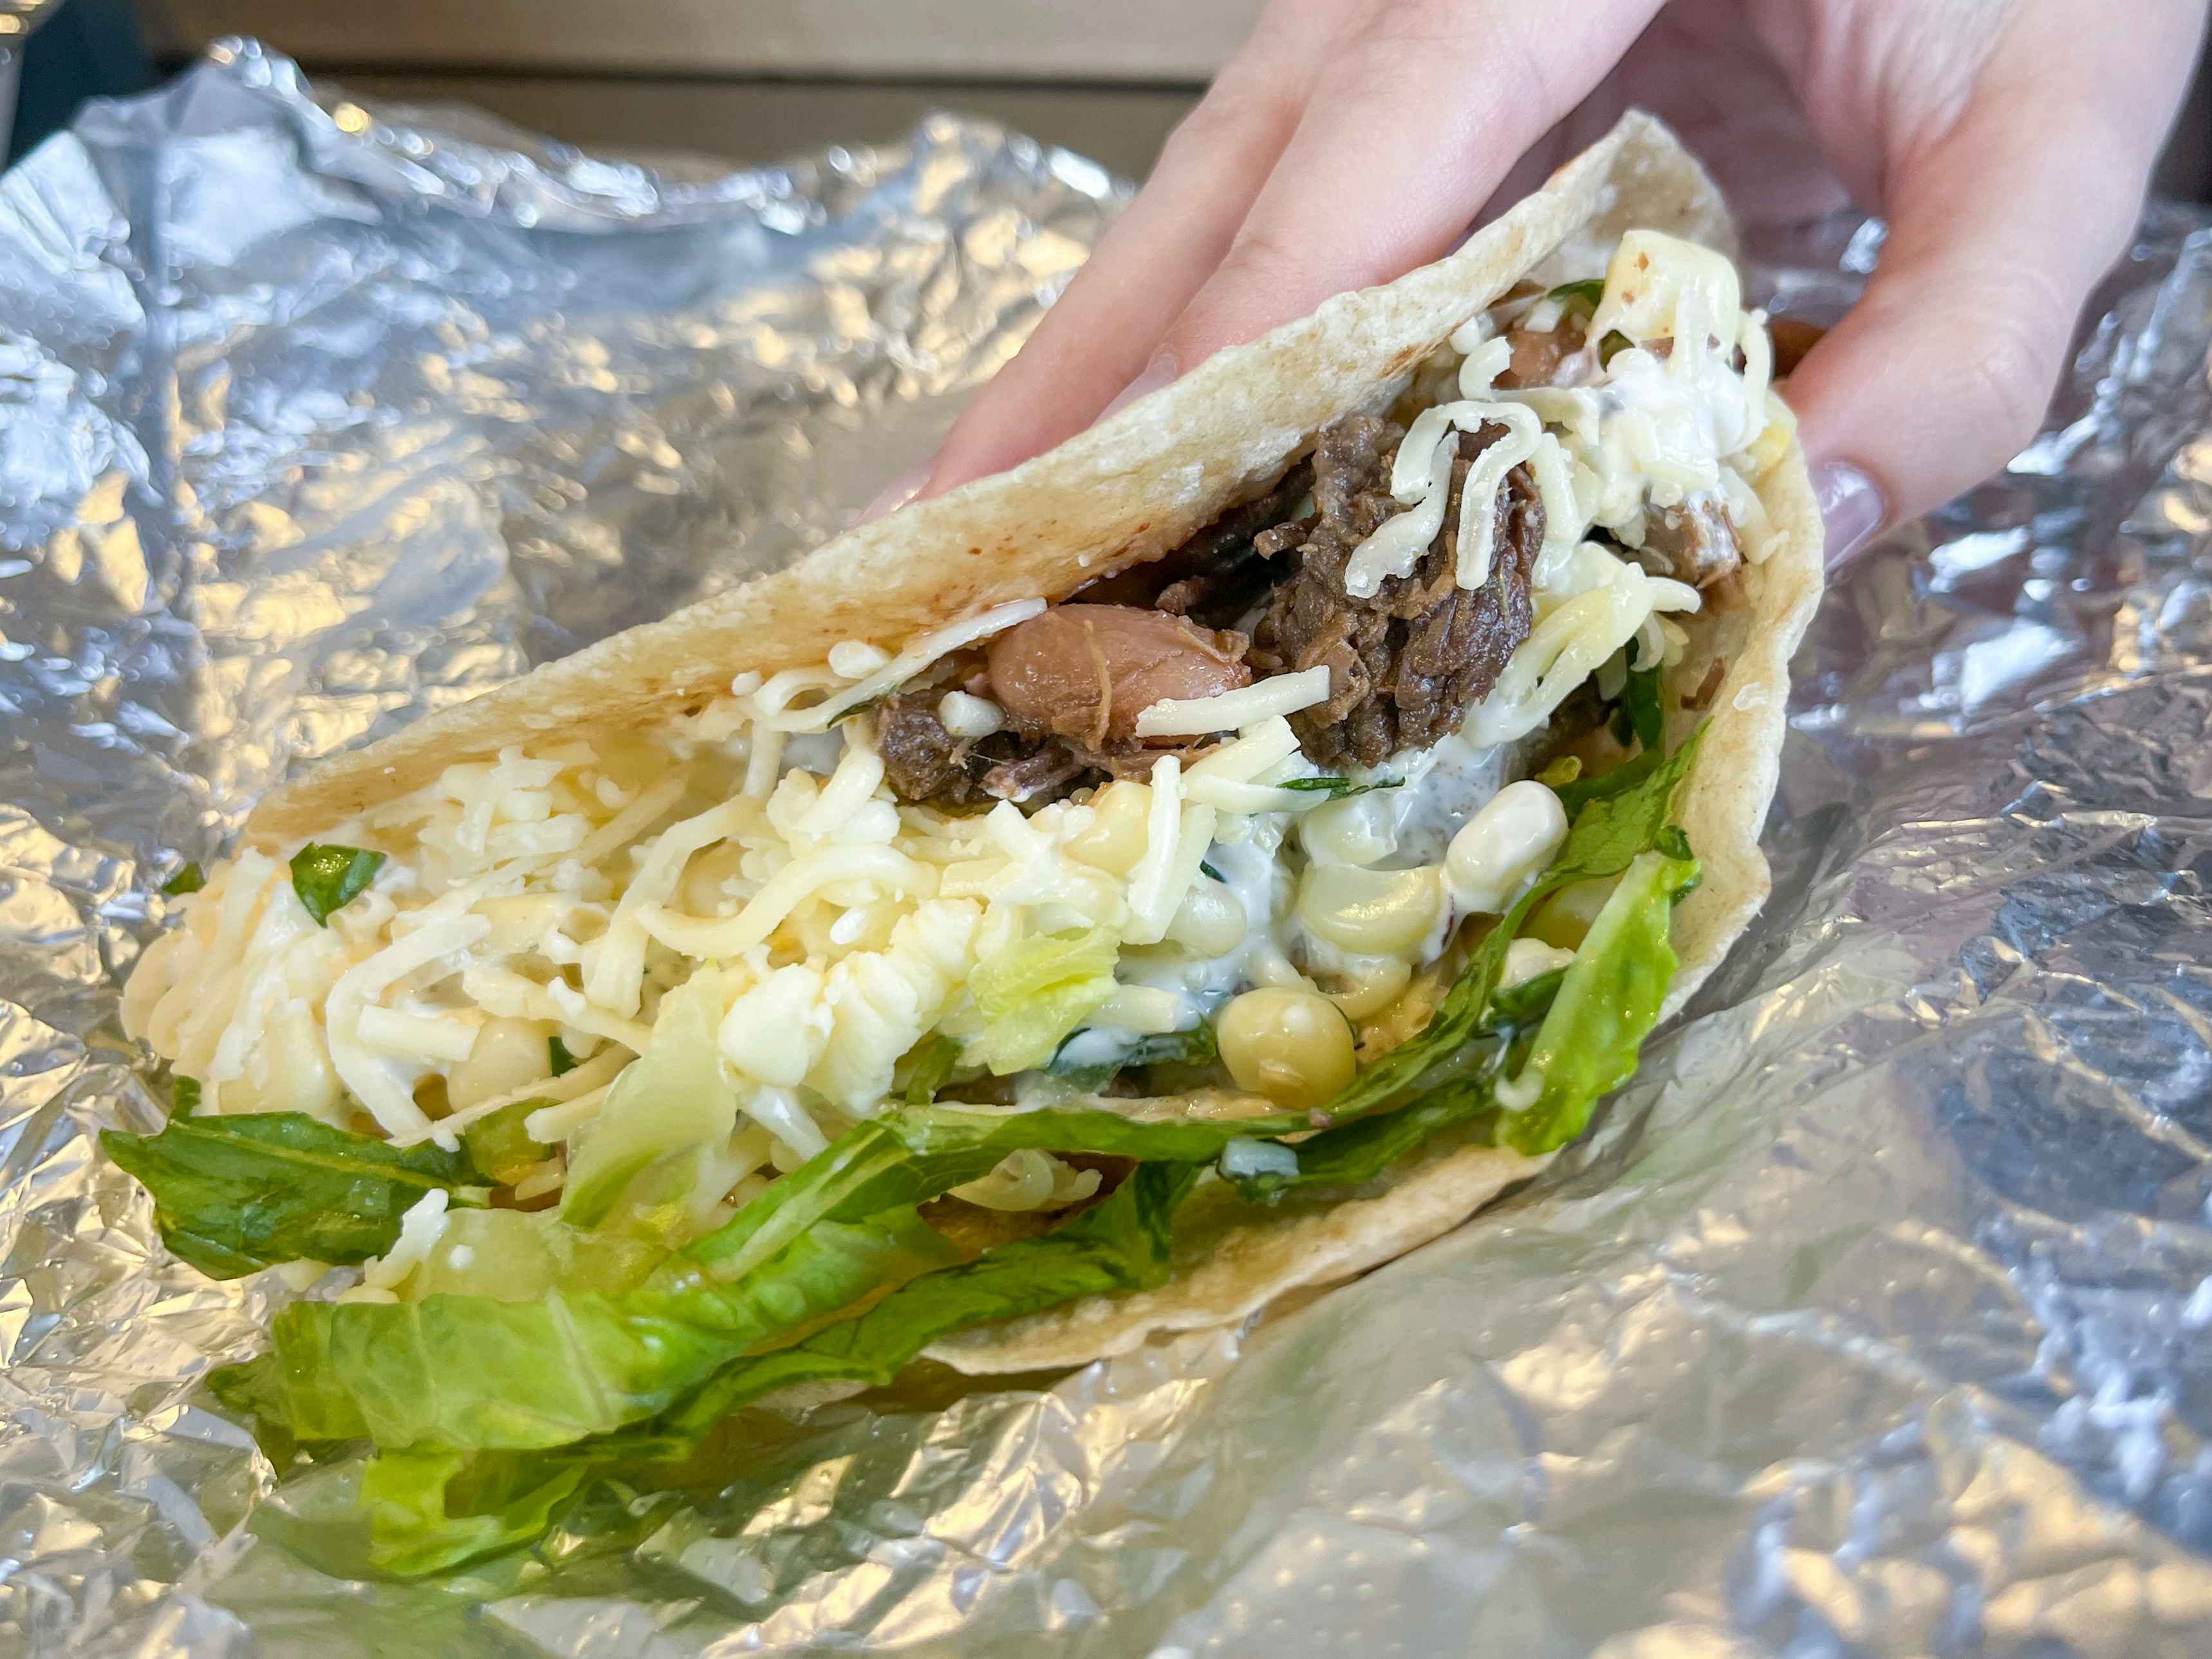 A person picking up a single taco.